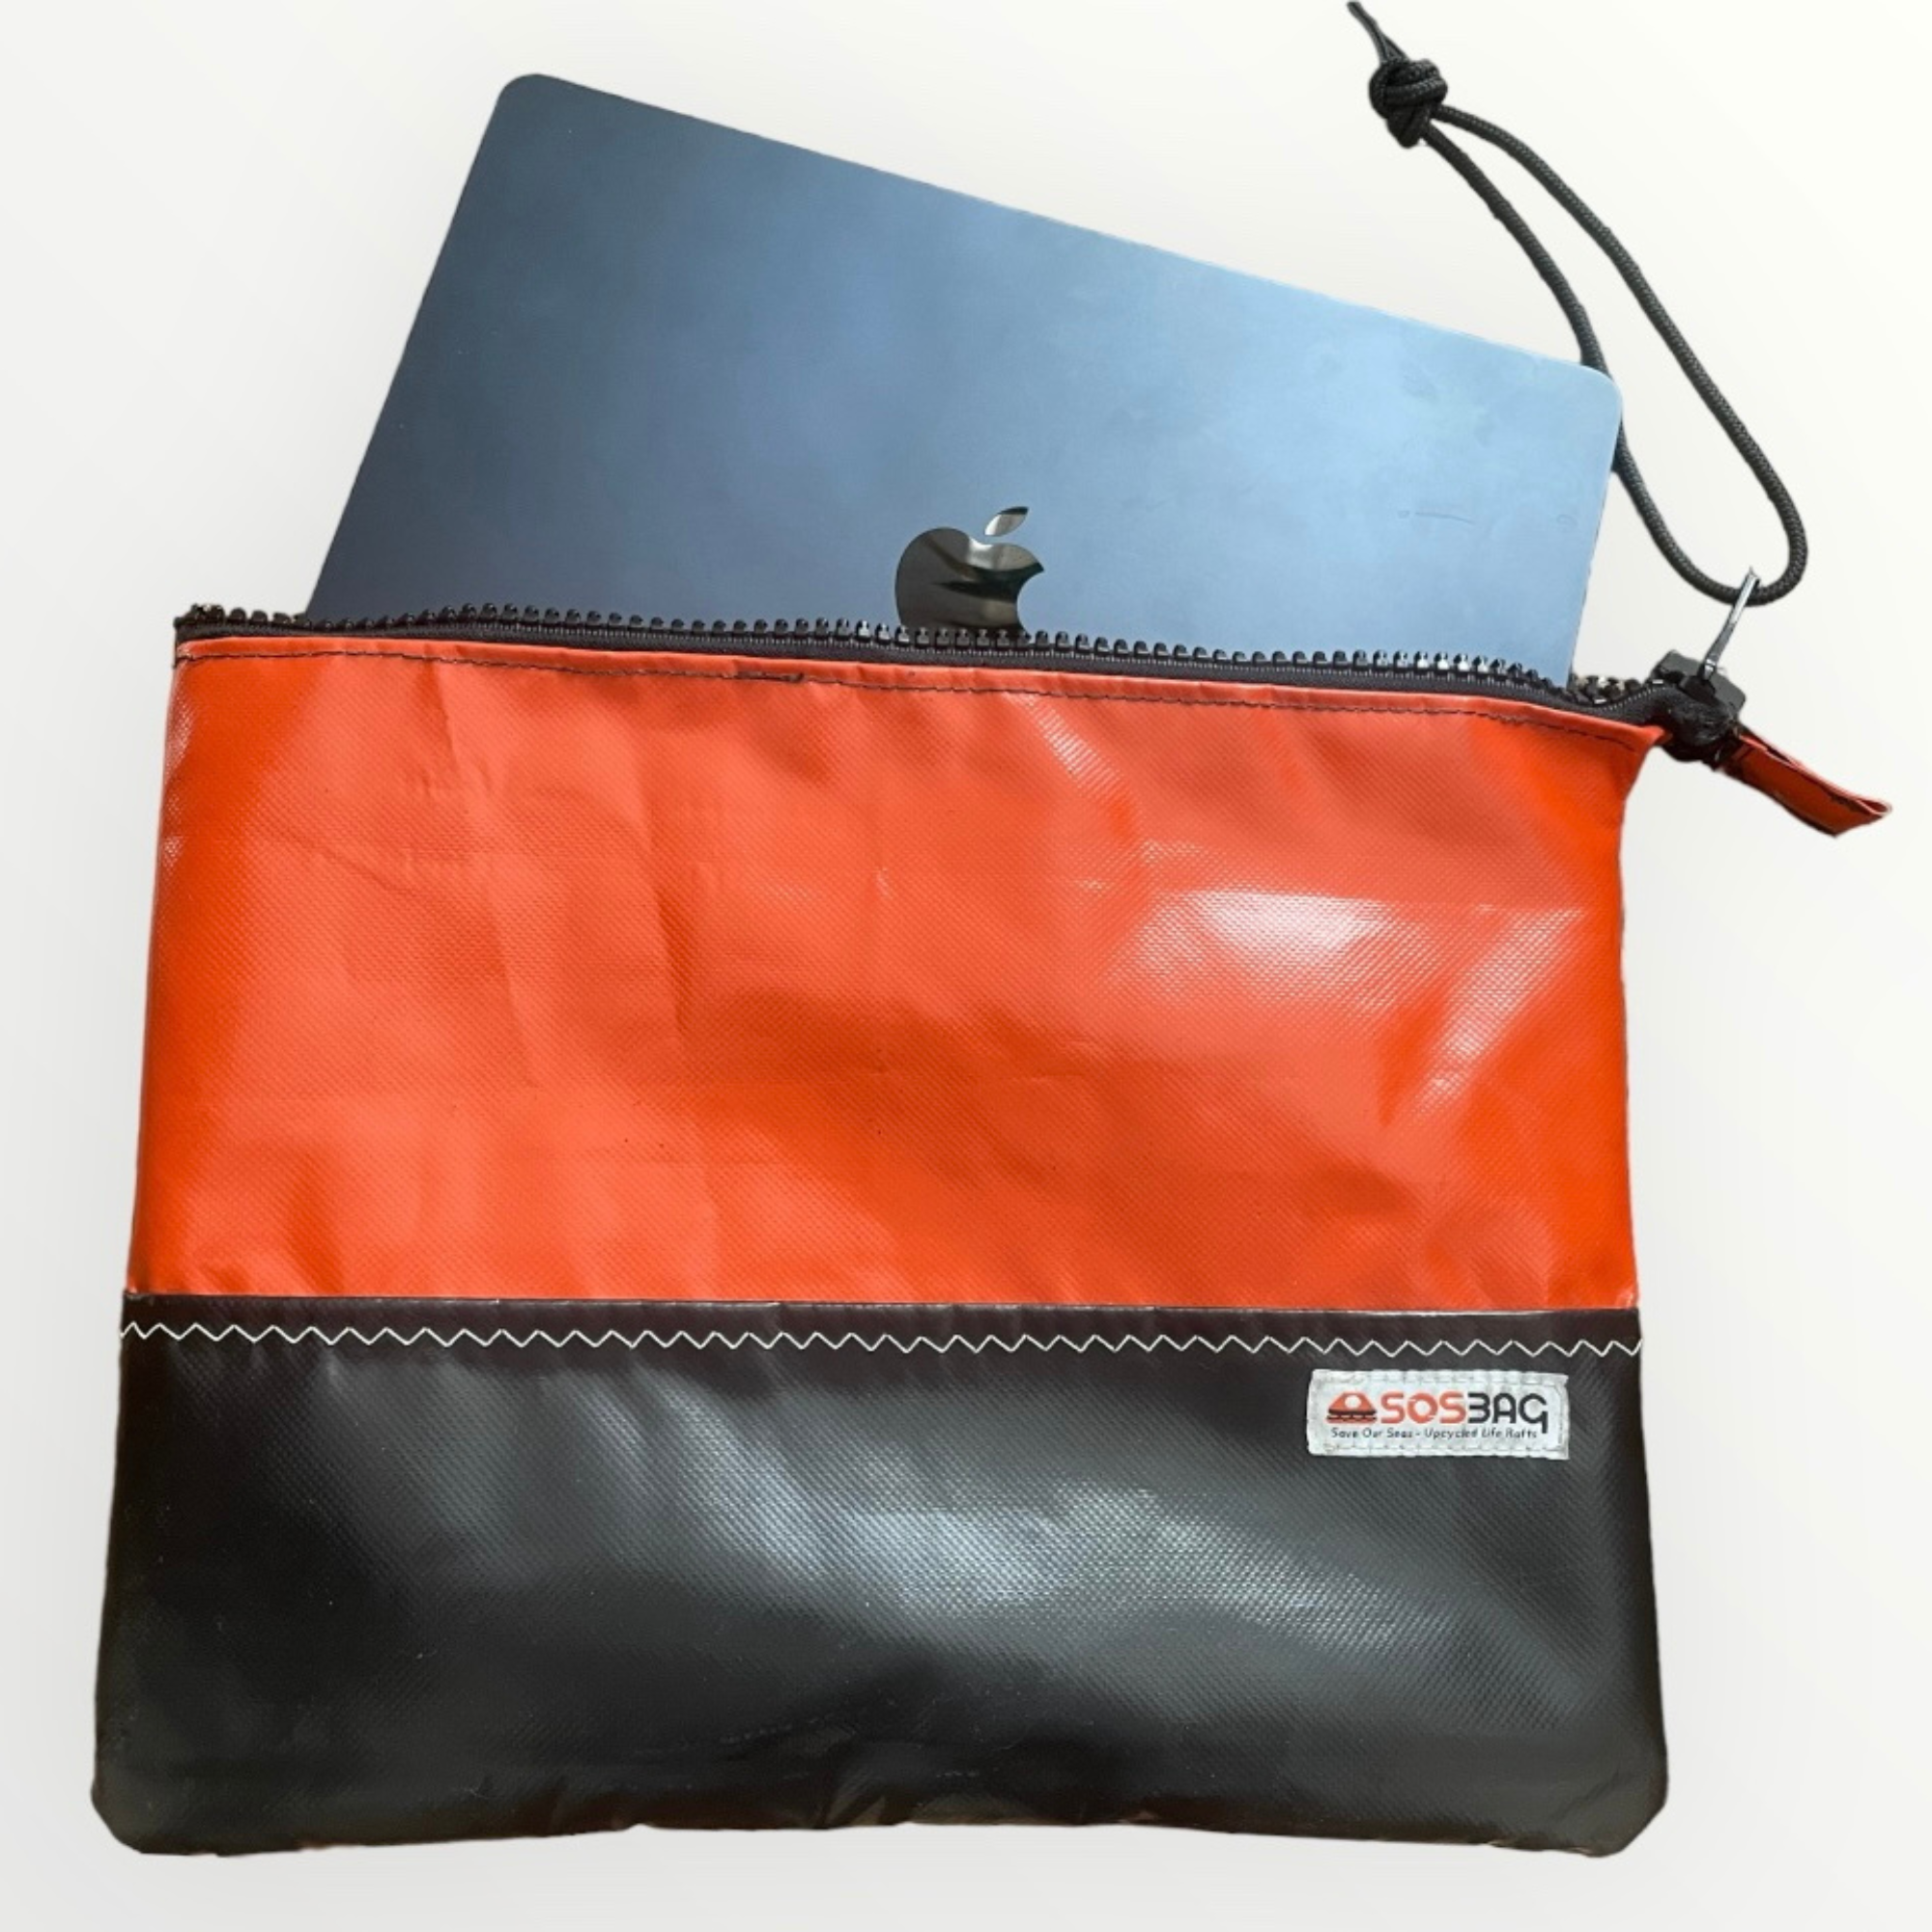 ÍTACA Clutch Bag for iPad, Laptop, documents or toiletry bag for the beach. Multipurpose. Sustainable versatility.